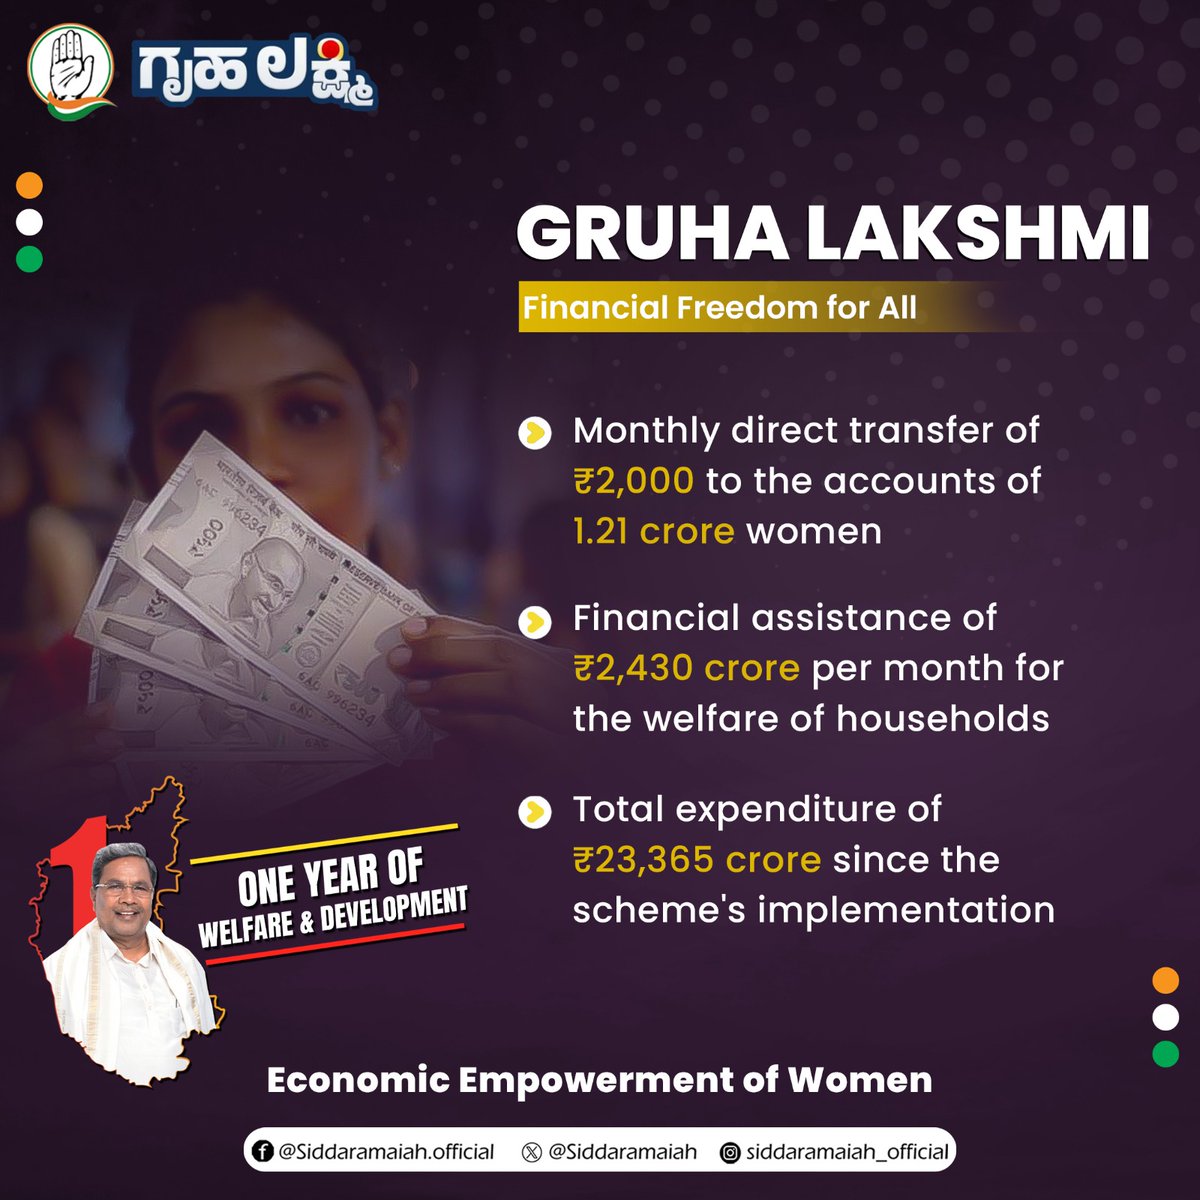 Financial Freedom for All! Monthly ₹2,000 transfers to 1.21 crore women, providing ₹2,430 crore in assistance each month. Since its inception, we've dedicated ₹23,365 crore to the economic empowerment of women. #ವರ್ಷ‌ಒಂದು_ಹರ್ಷ‌ಎಂದೆಂದು